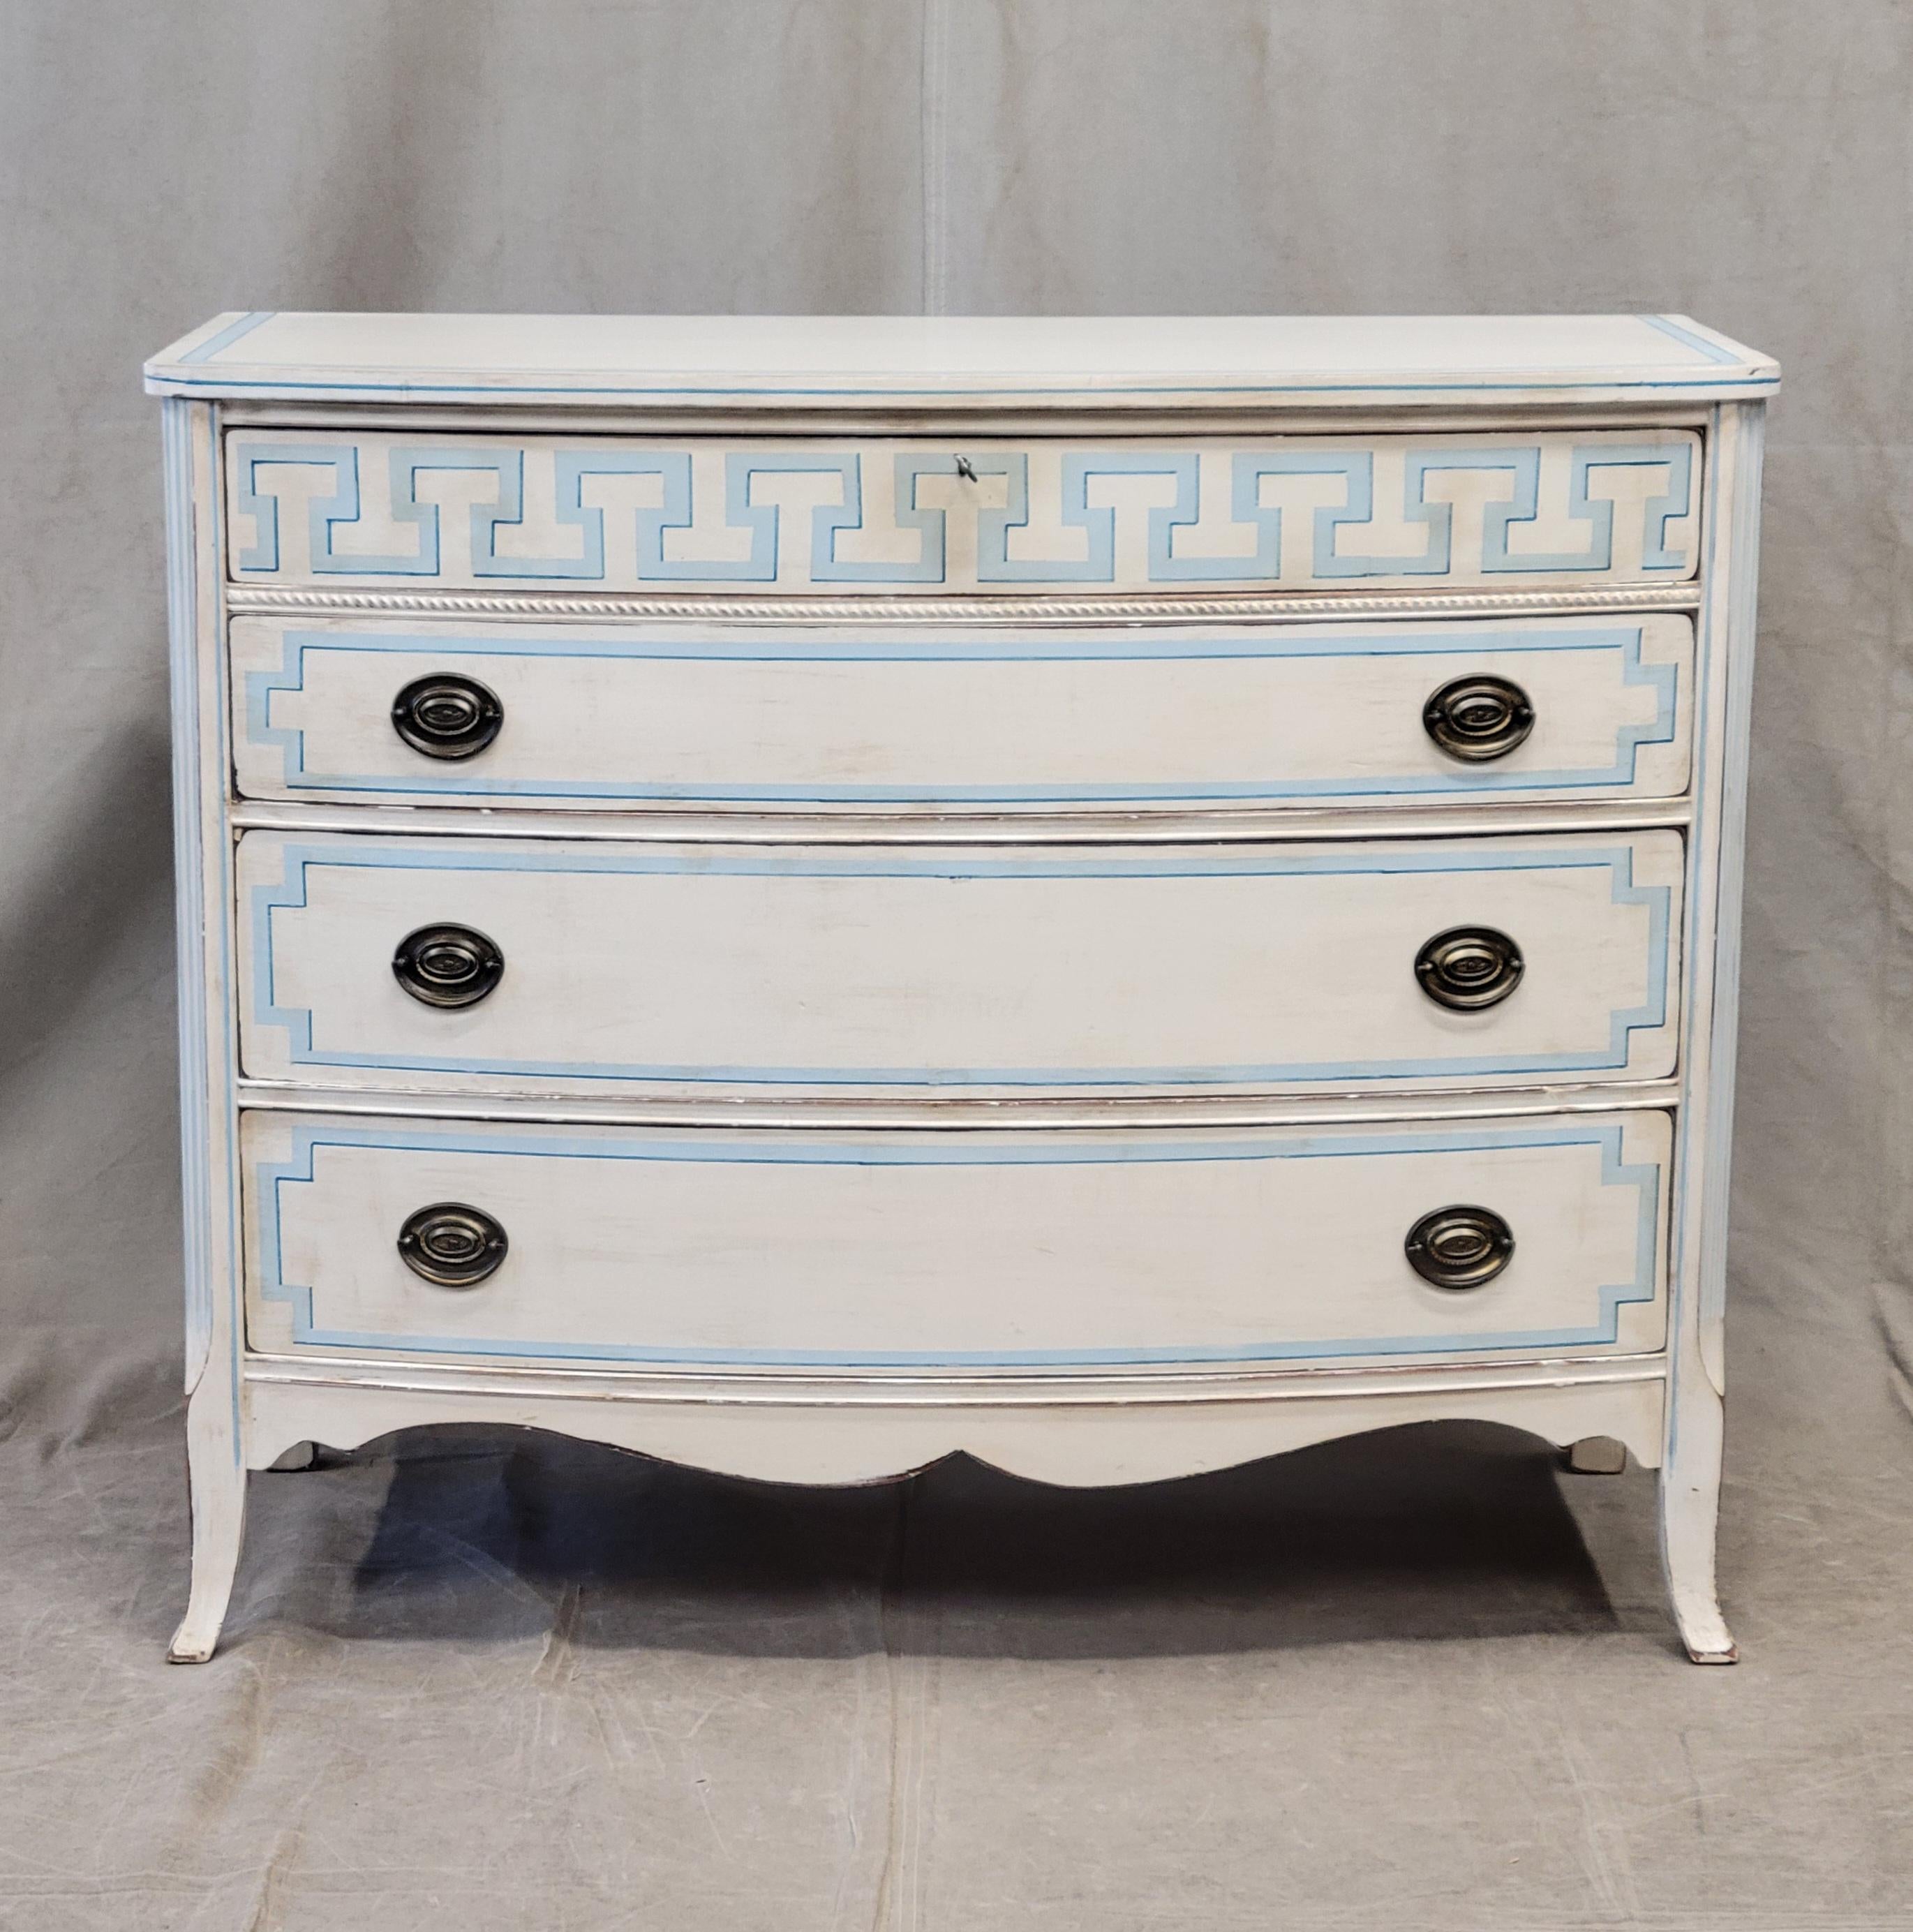 An absolutely charming vintage hand painted dresser with distressed white paint and blue trompe l'oeil French line motif. The top drawer is embellished with a stunning trompe l'oeil Greek key motif. The four drawers glide smoothly and offer plenty